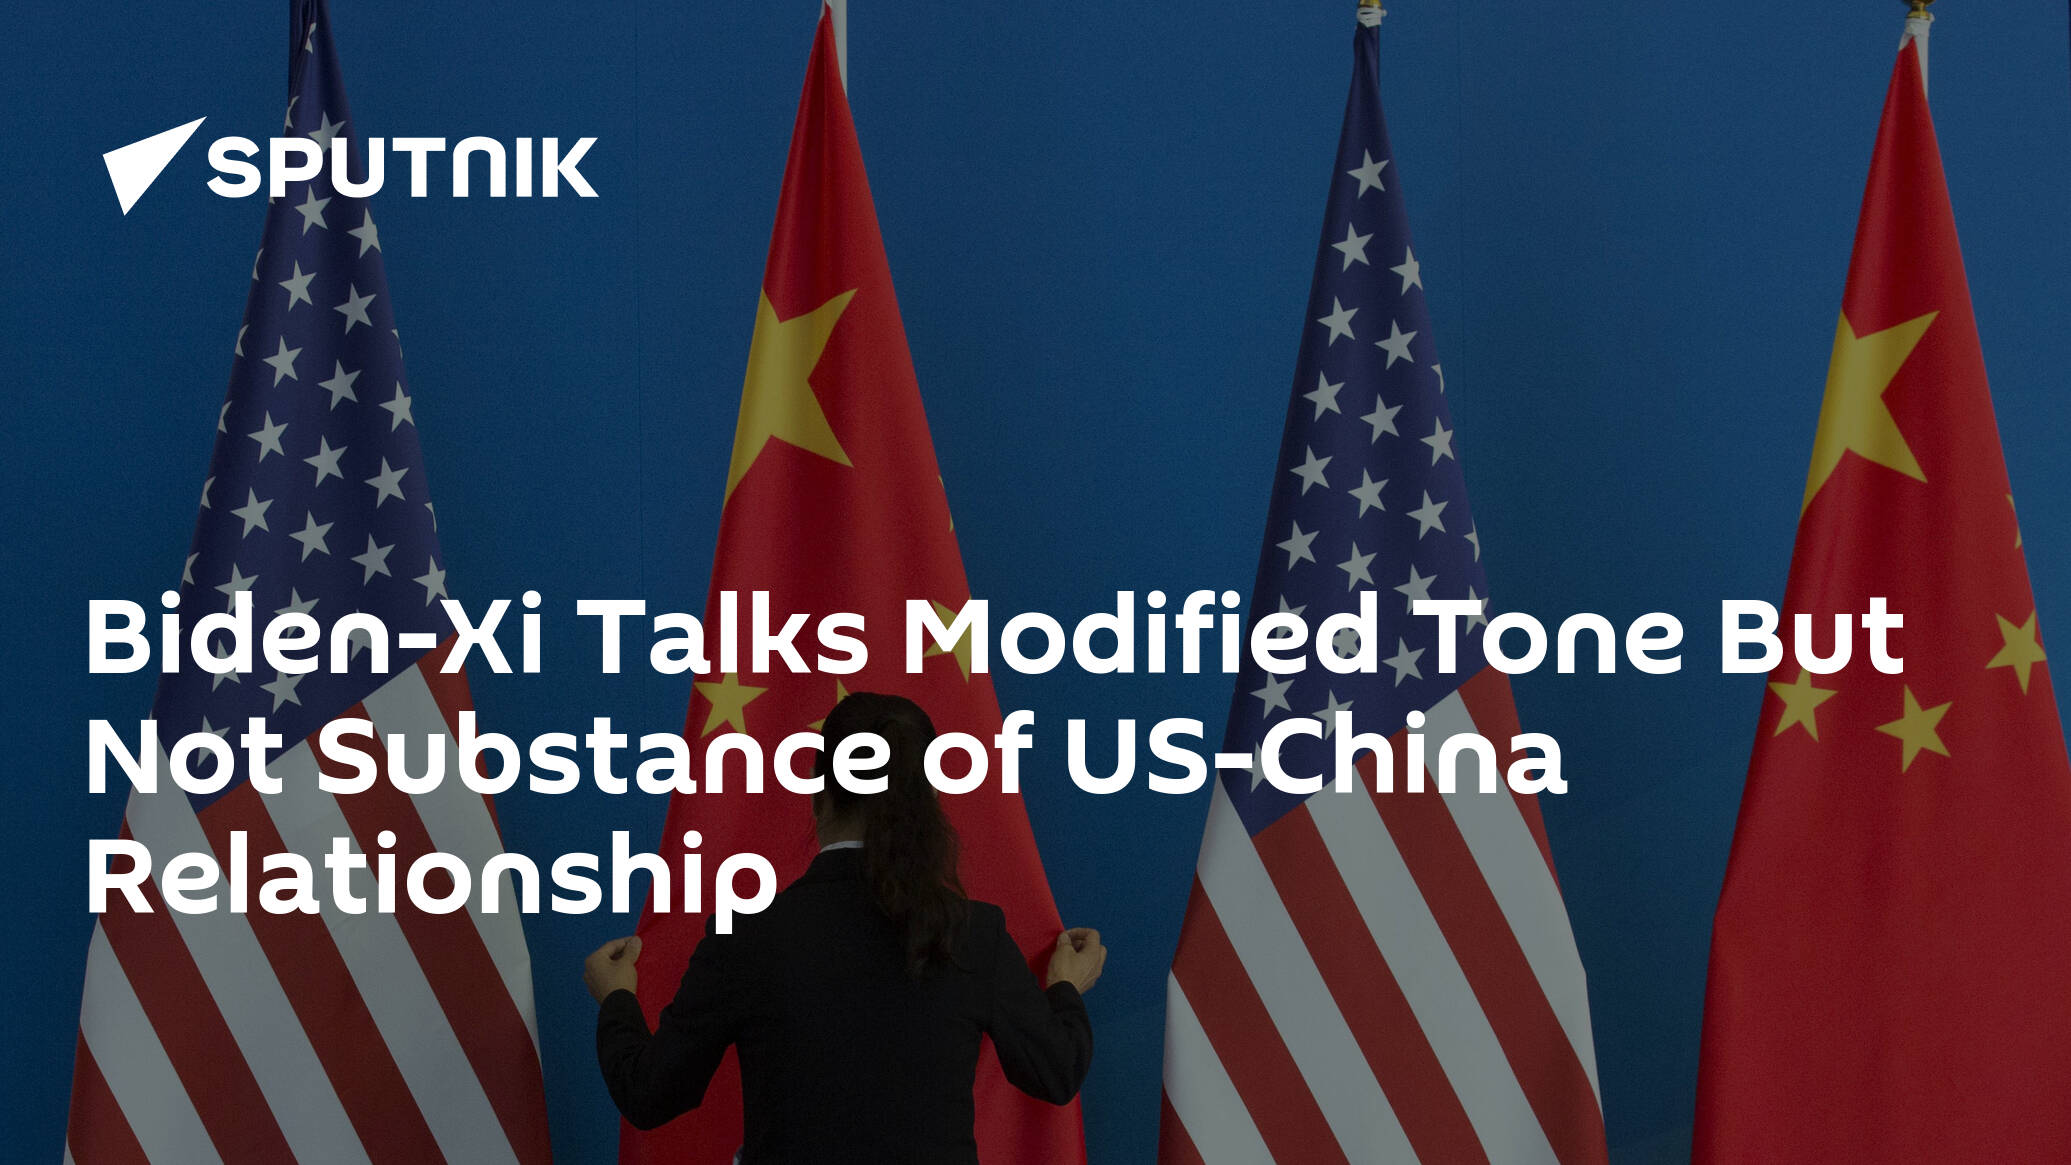 Biden-Xi Talks Modified Tone But Not Substance of US-China Relationship